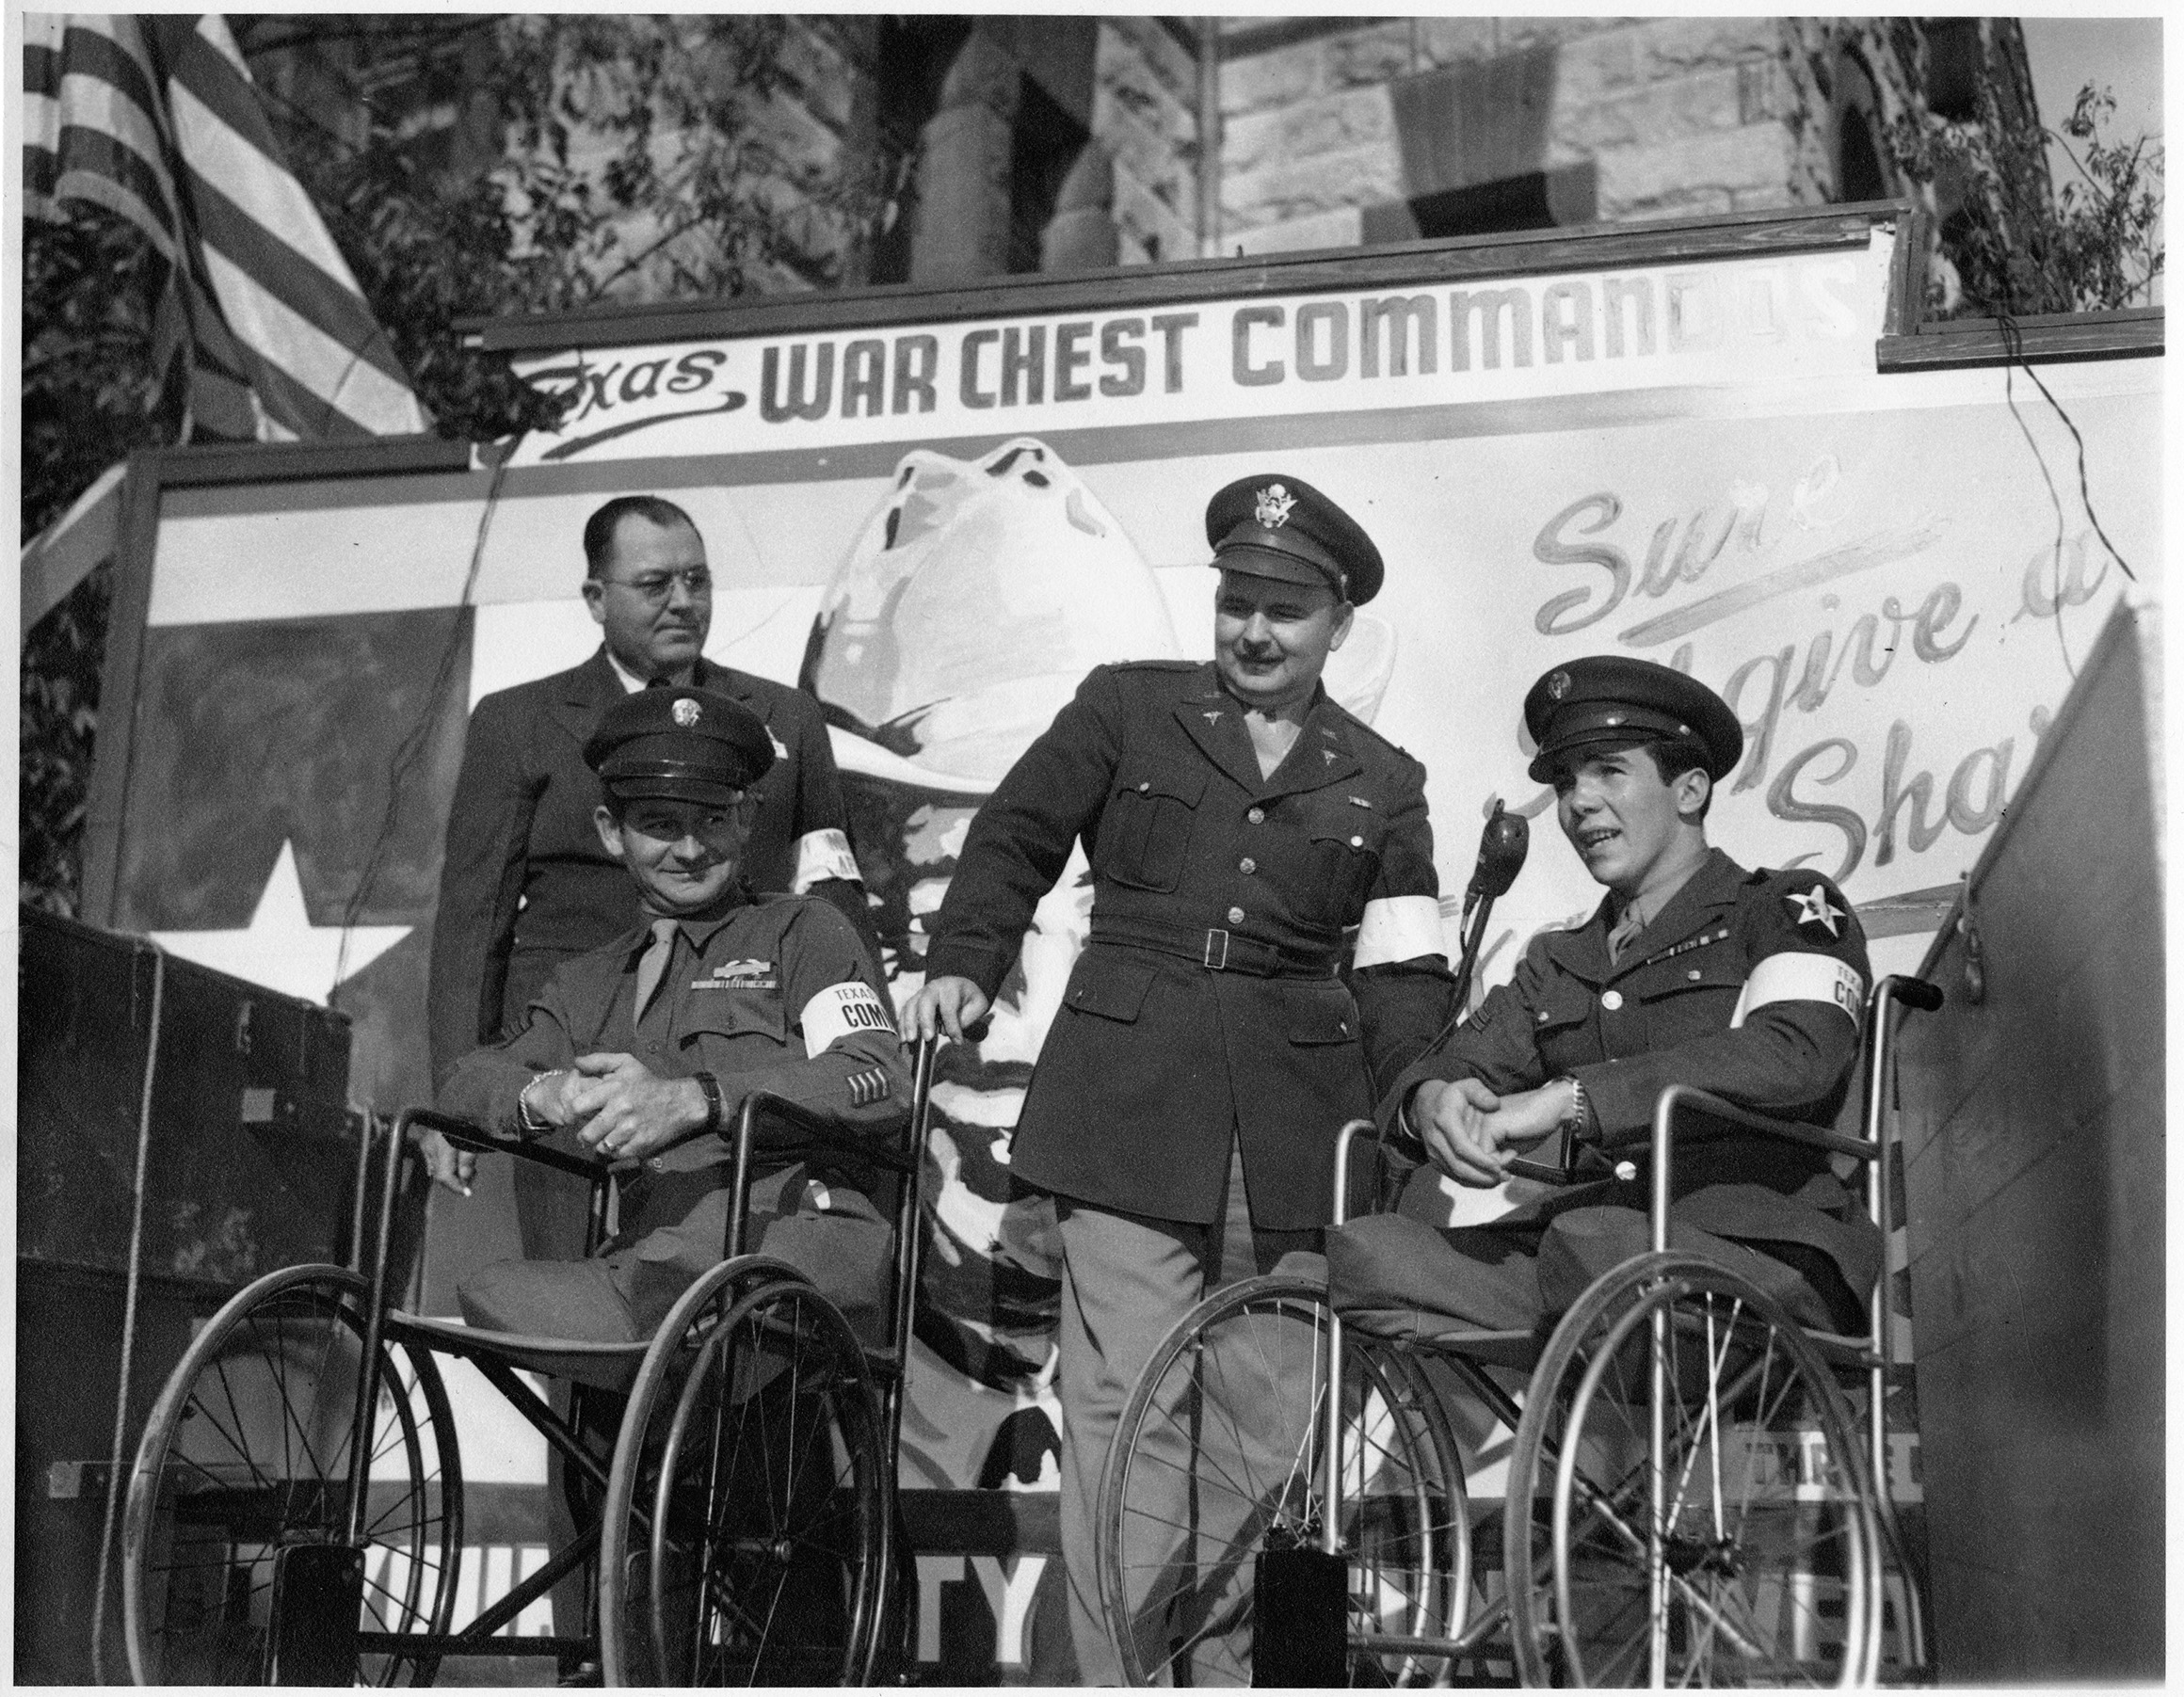 Four men in military uniform pose in front of a poster for the Texas ...